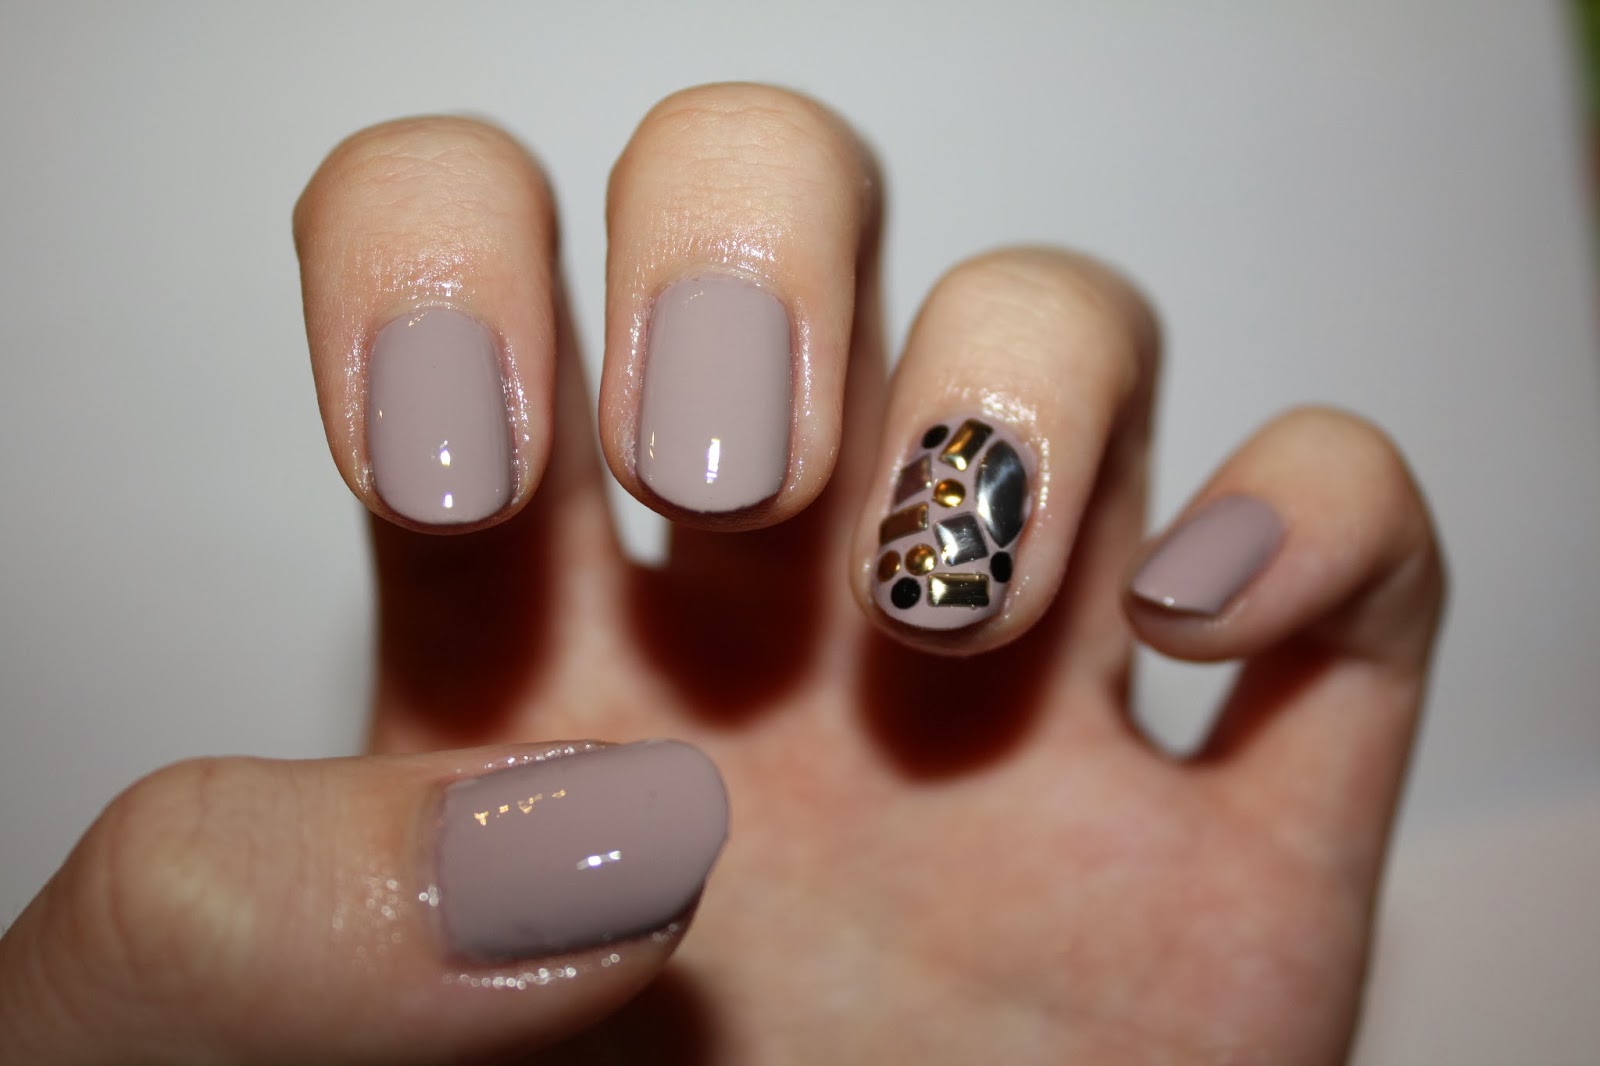 How To: Apply Nail Studs/Decals | Jessicaclaranoelle